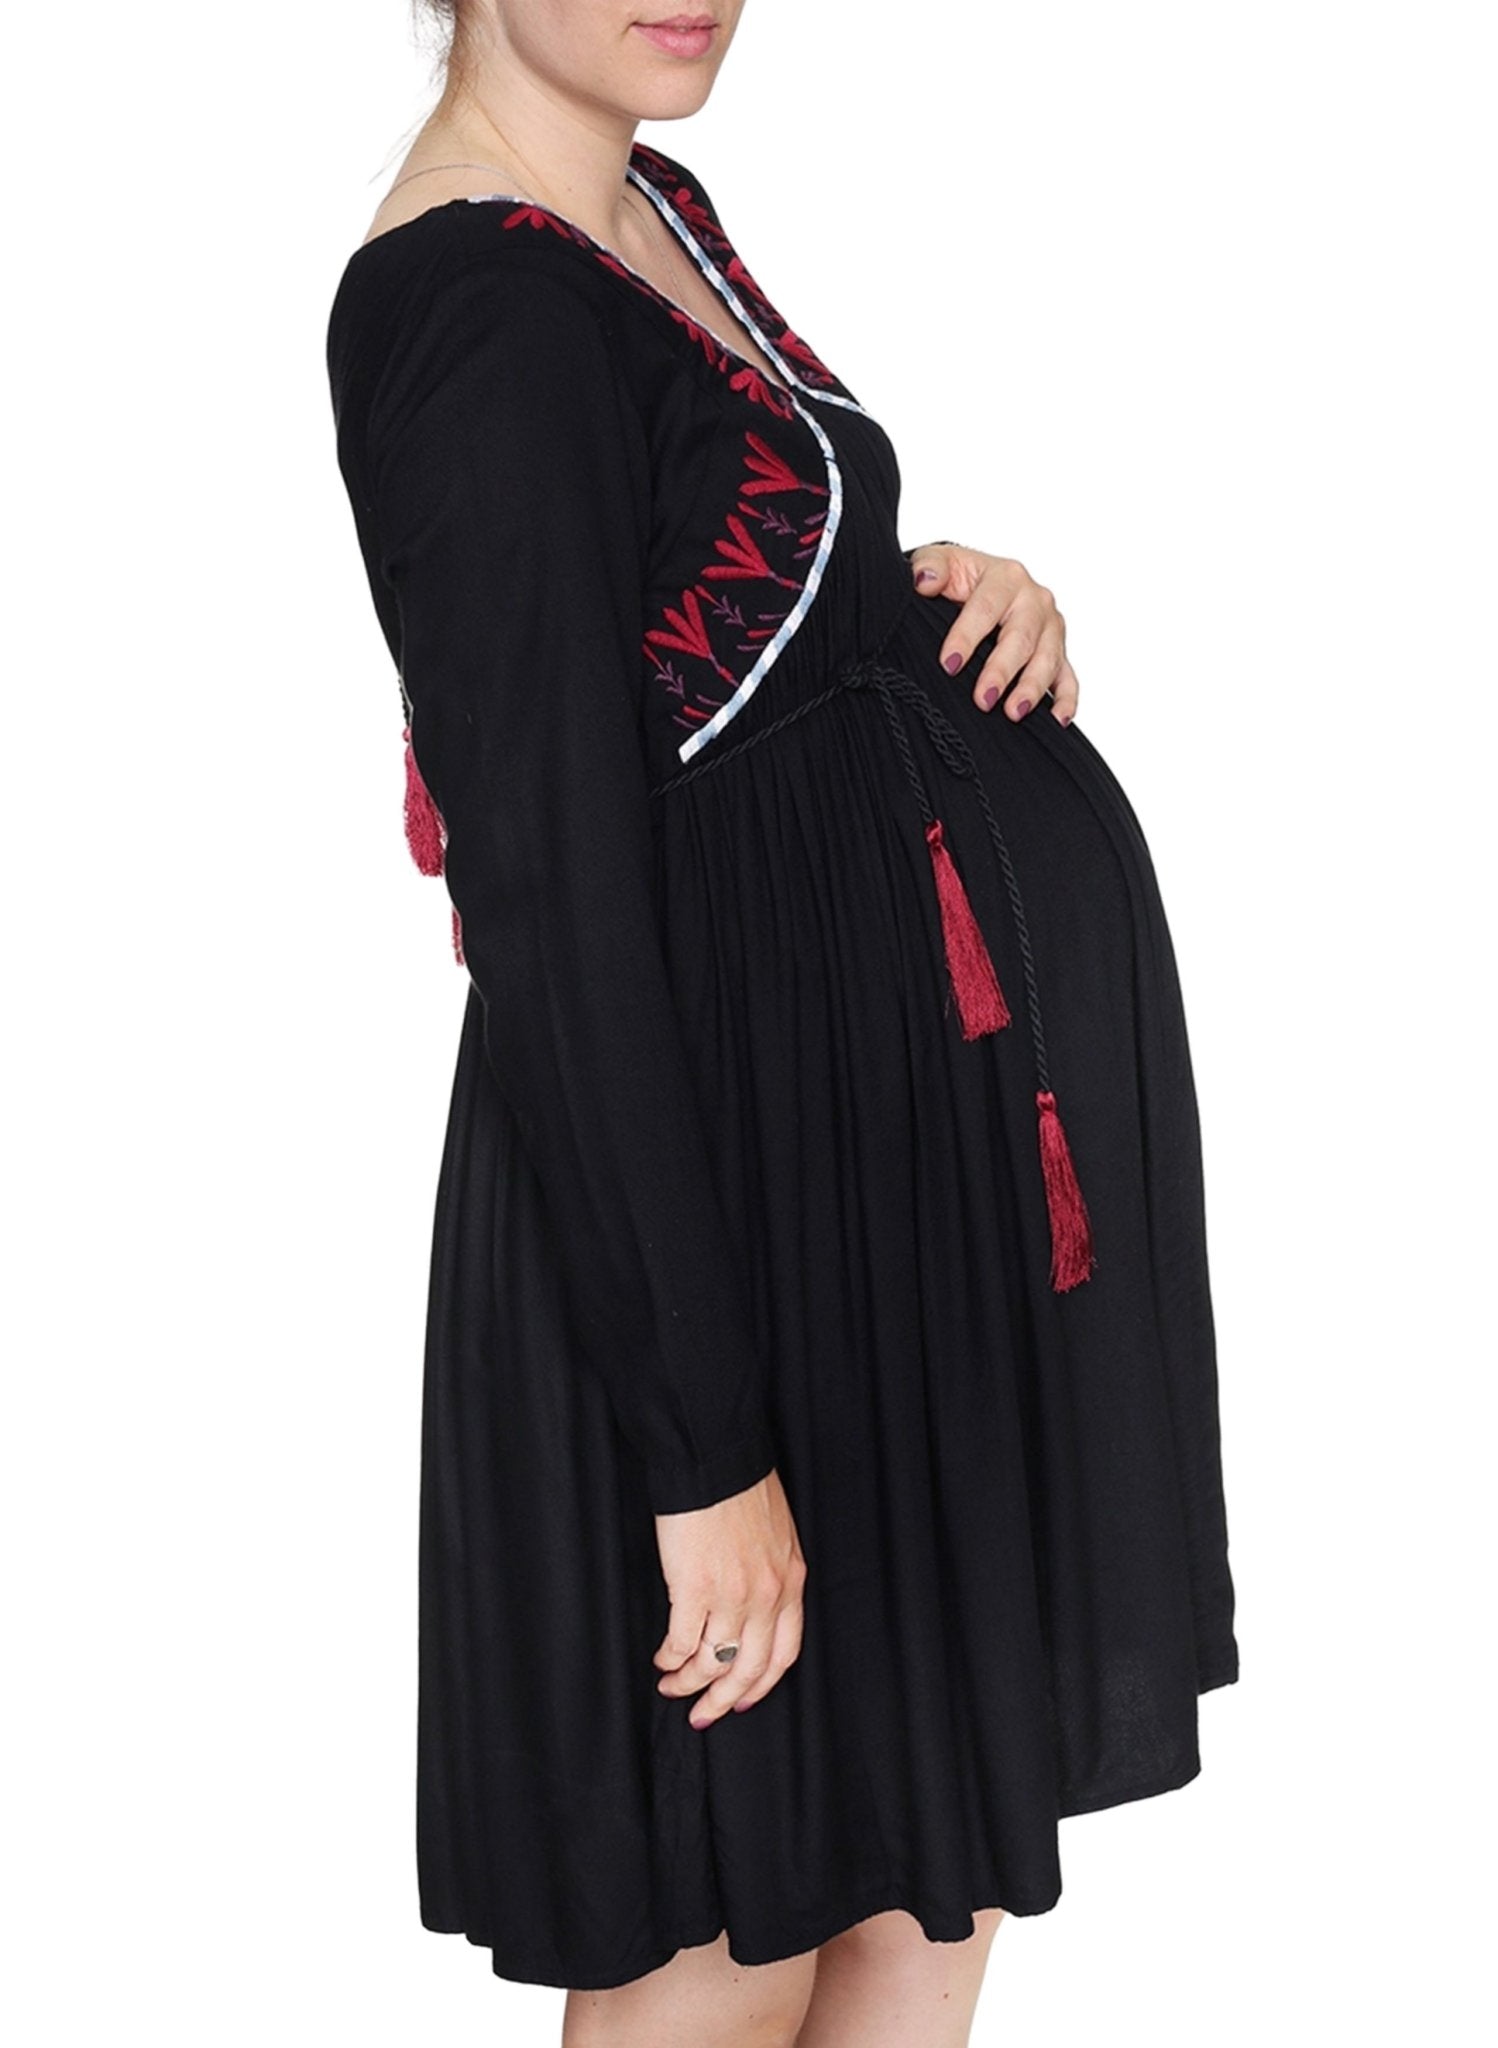 Maternity & Nursing Embroidered Dress - Black/Bordeaux - Mums and Bumps